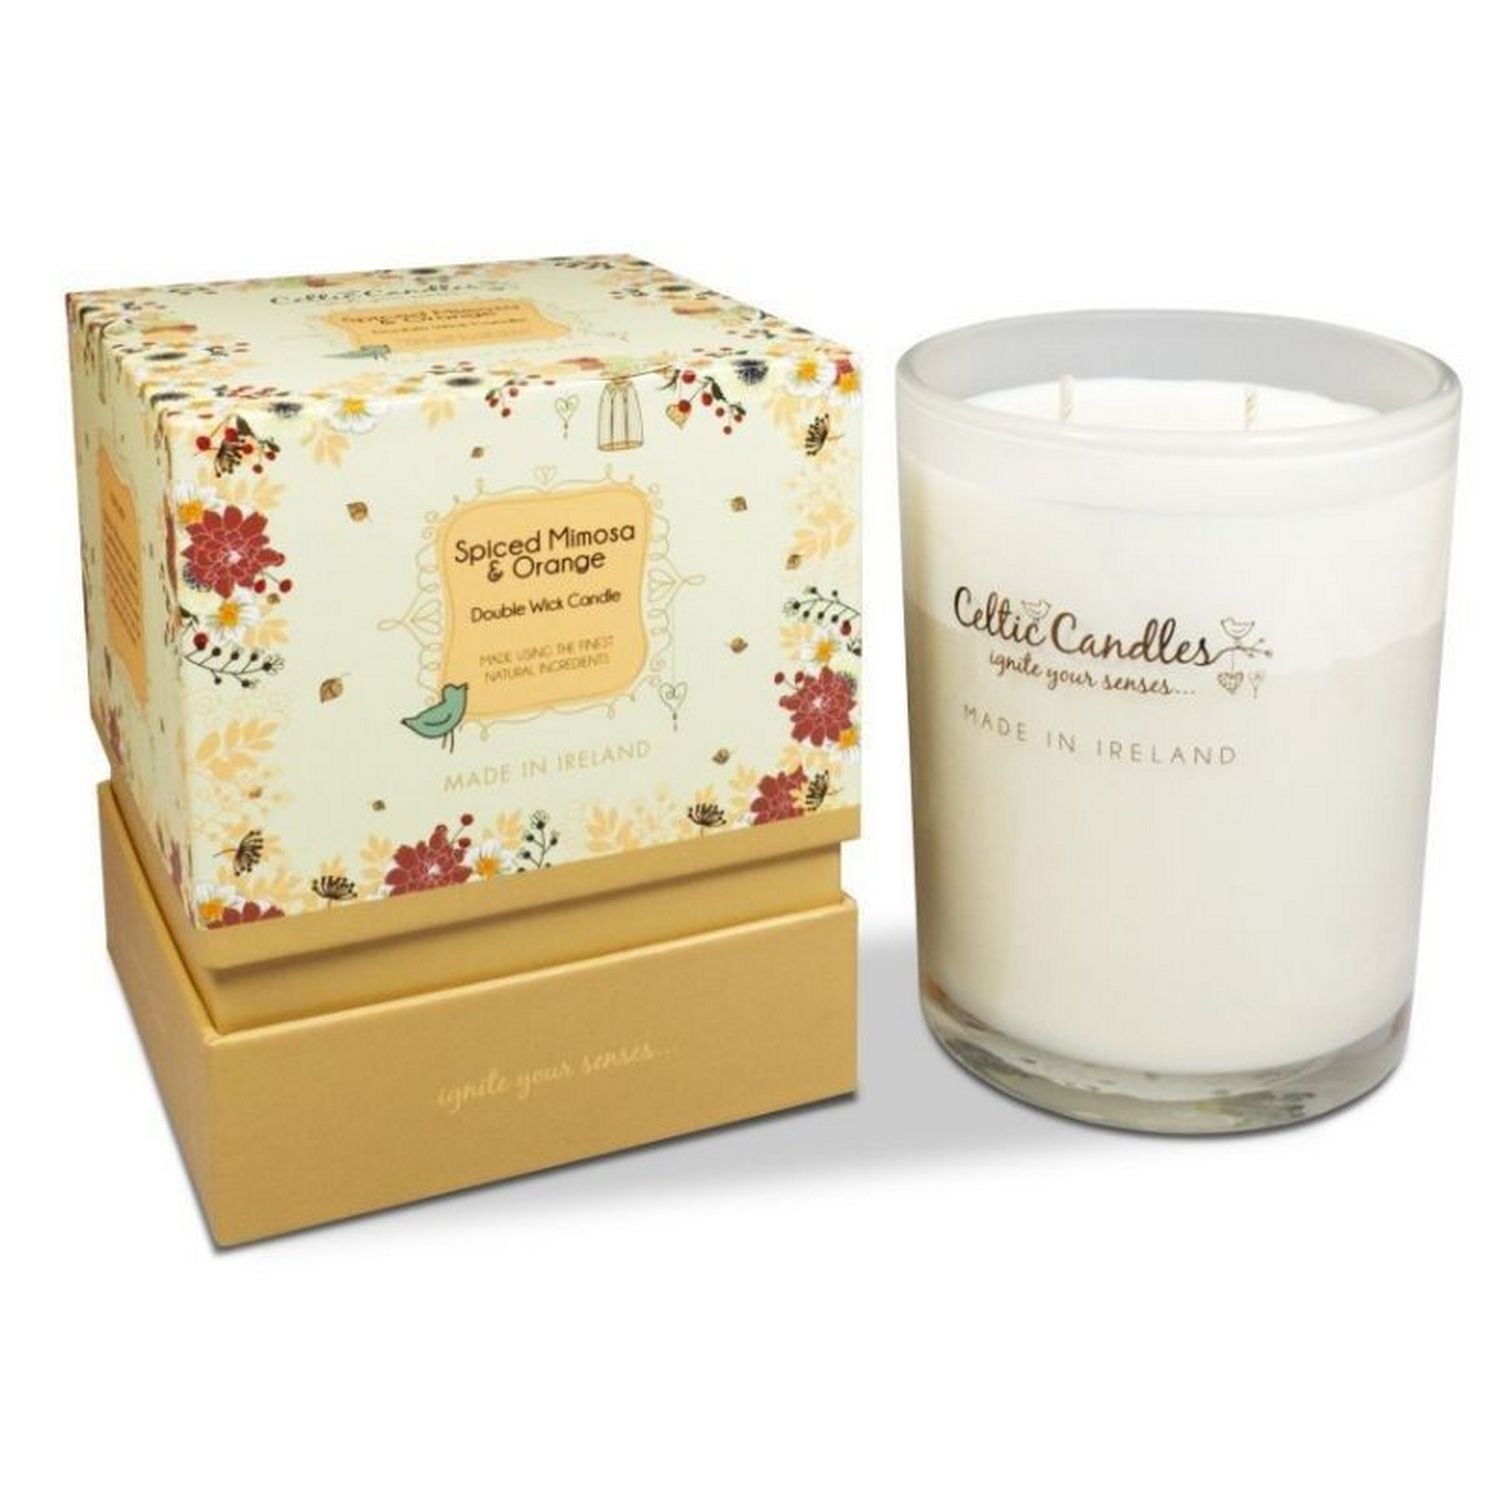 Celtic Candle Double Wick Spiced Mimosa Candle